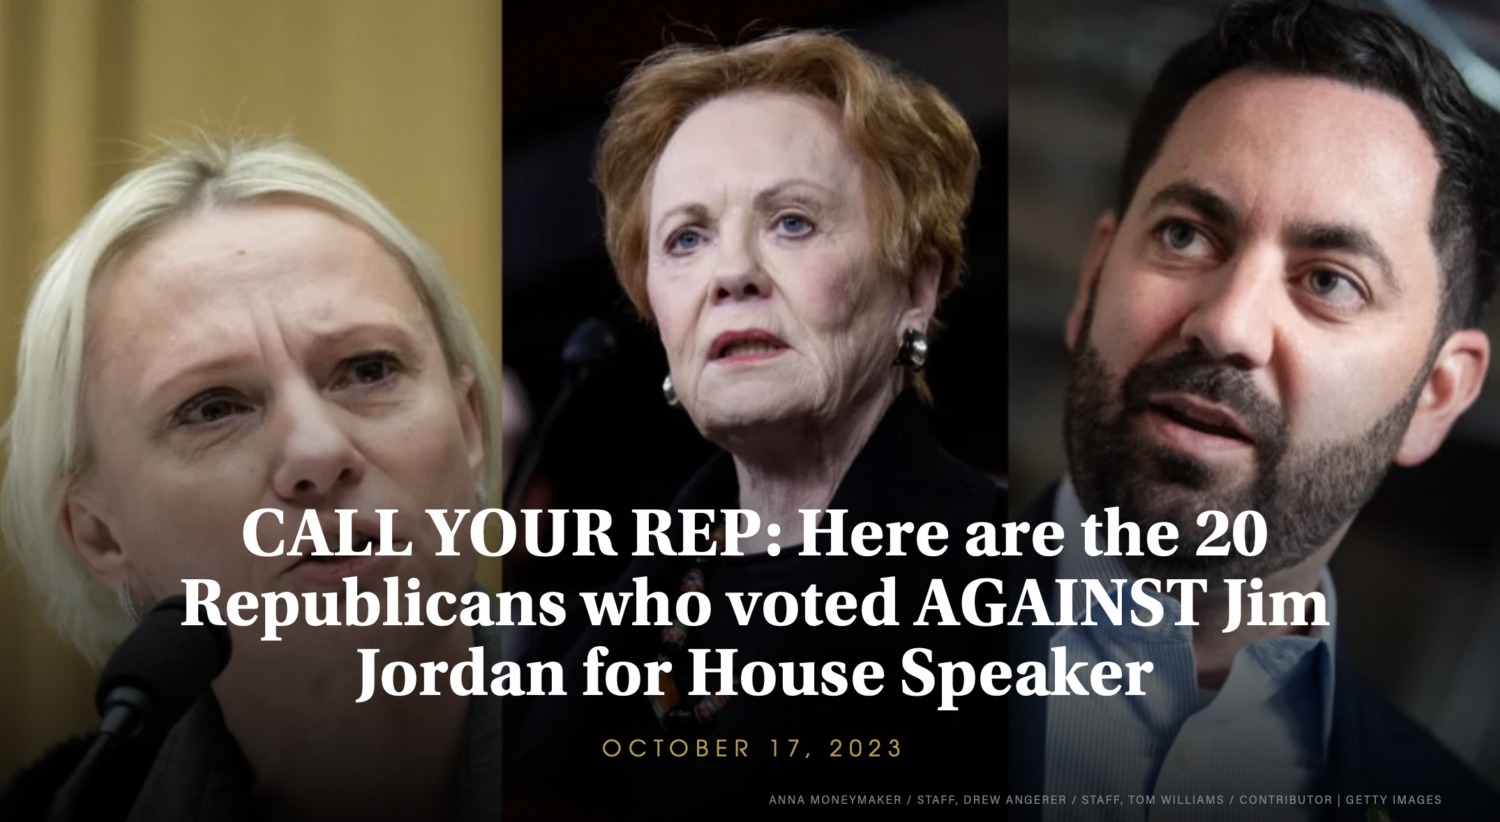 CALL YOUR REP: Here are the 20 Republicans who voted AGAINST Jim Jordan for House Speaker